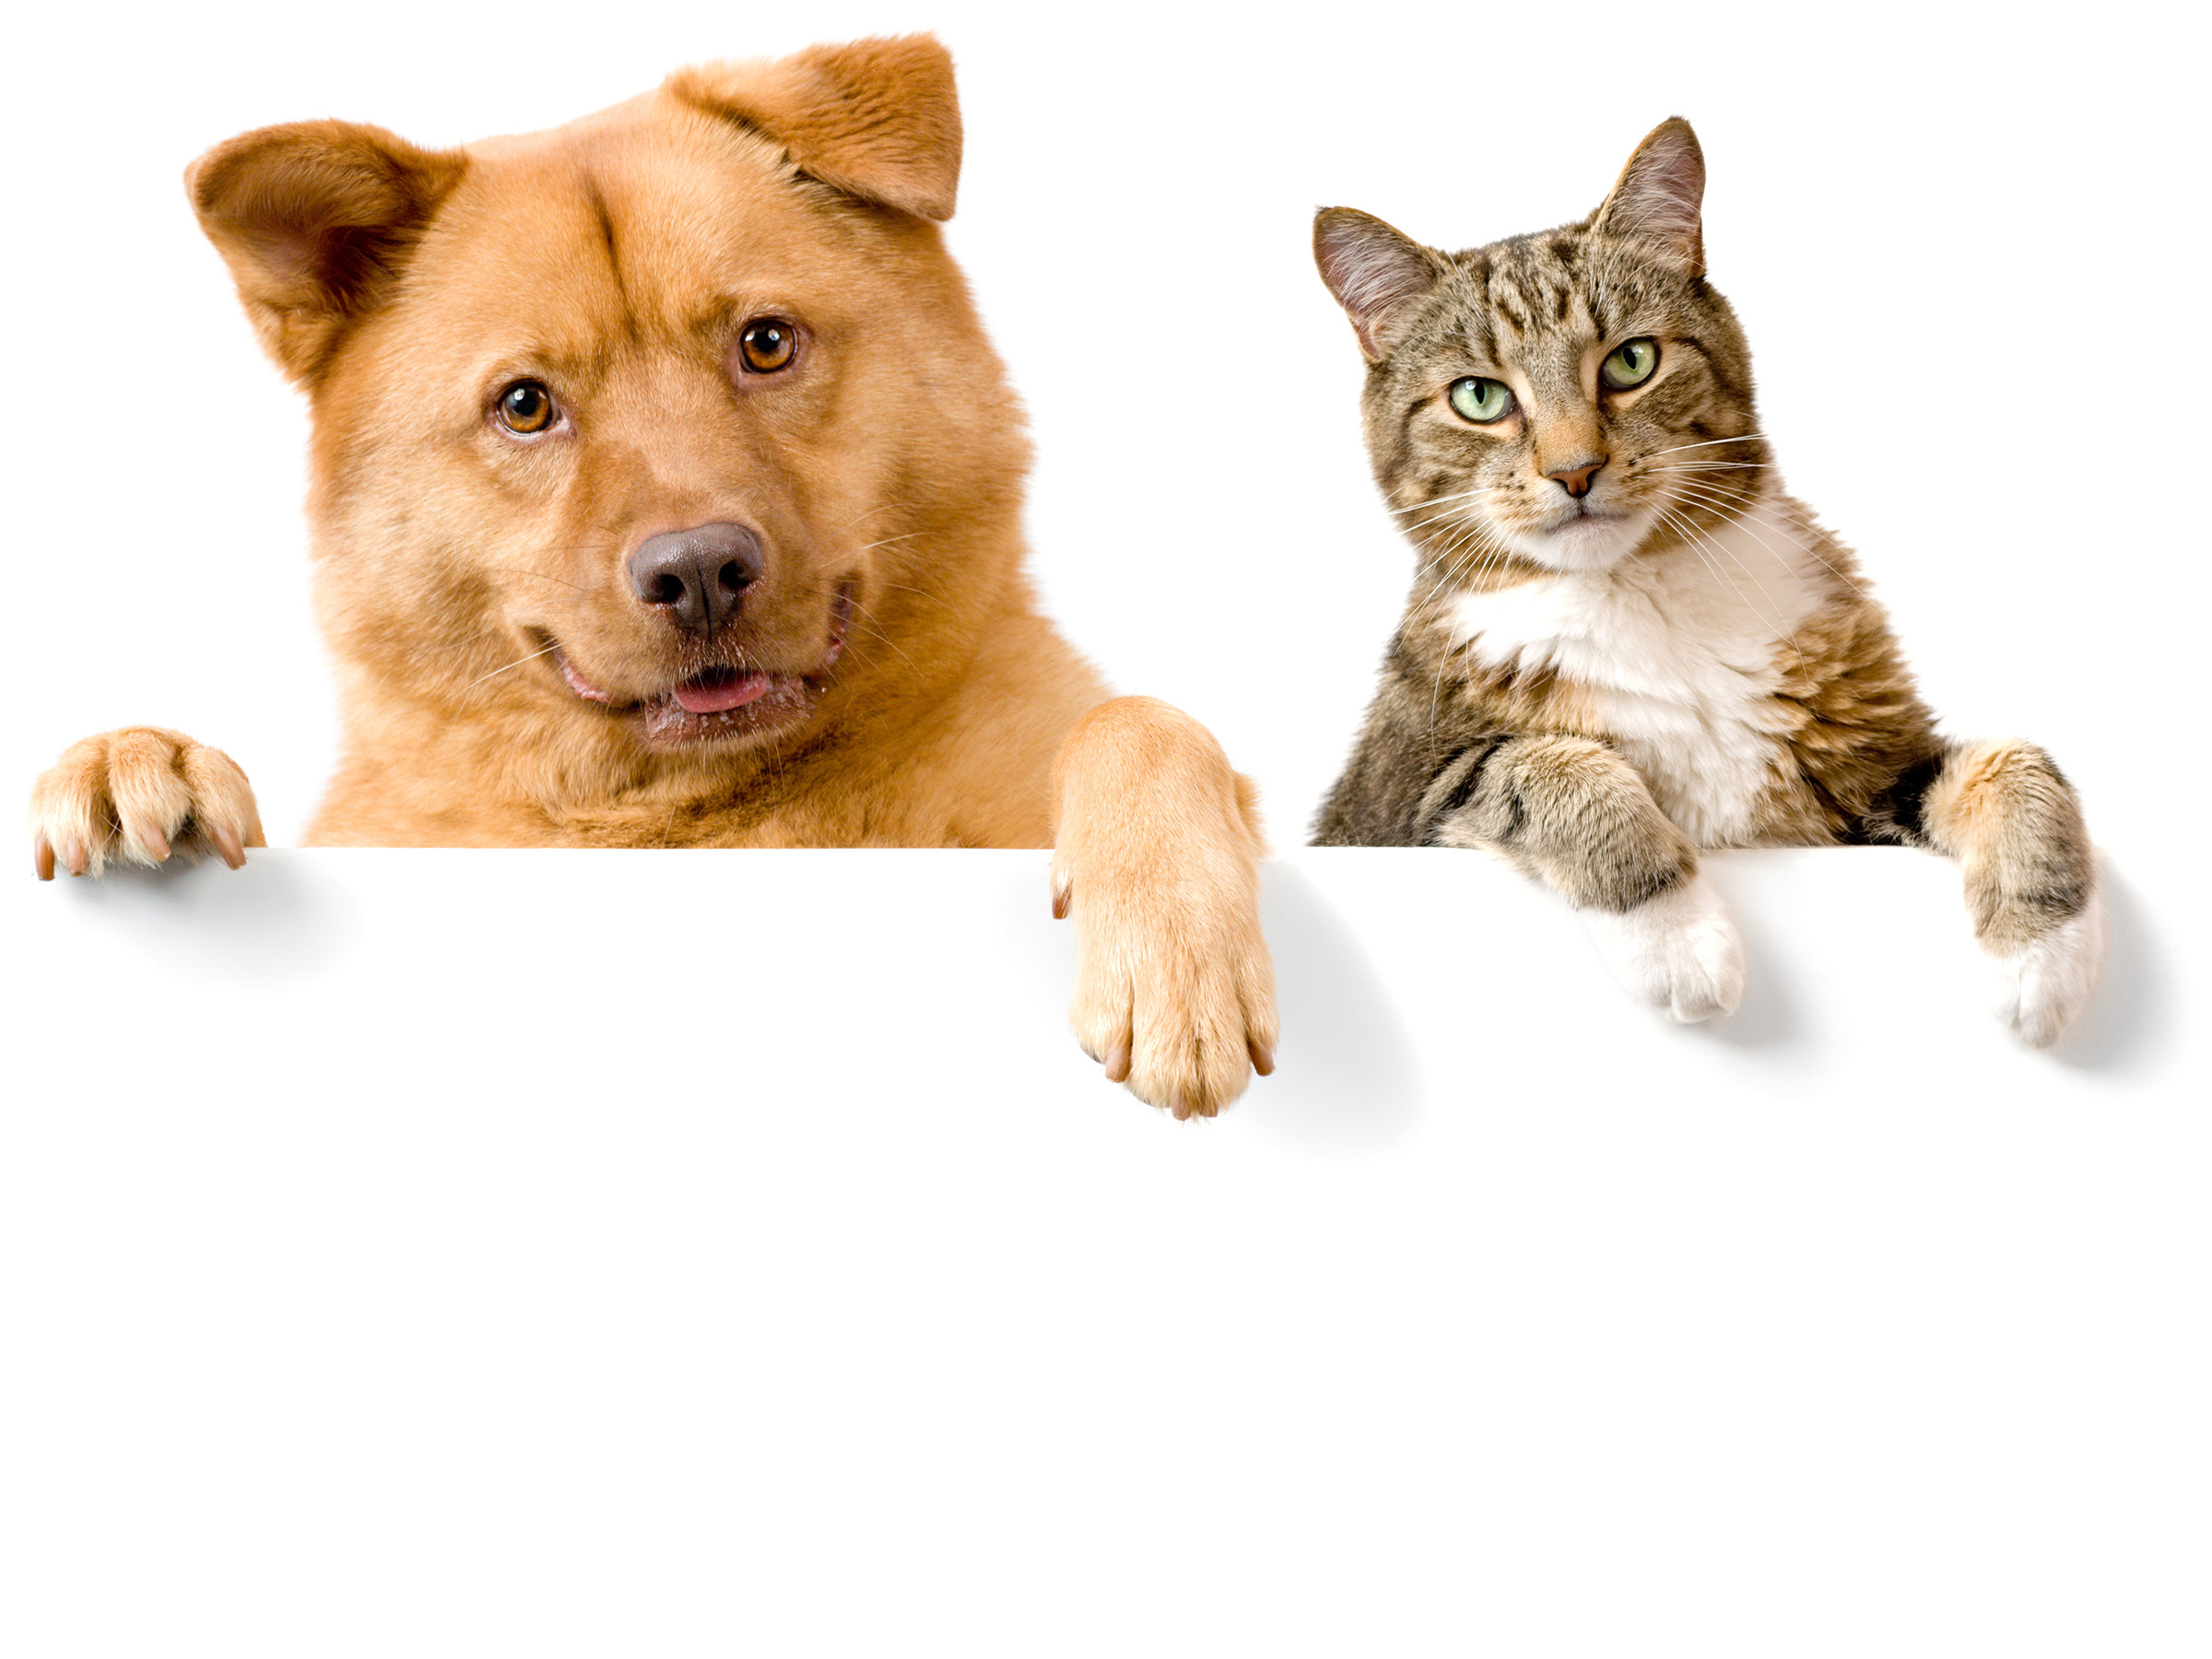 Dog And Cat Wallpaper Background